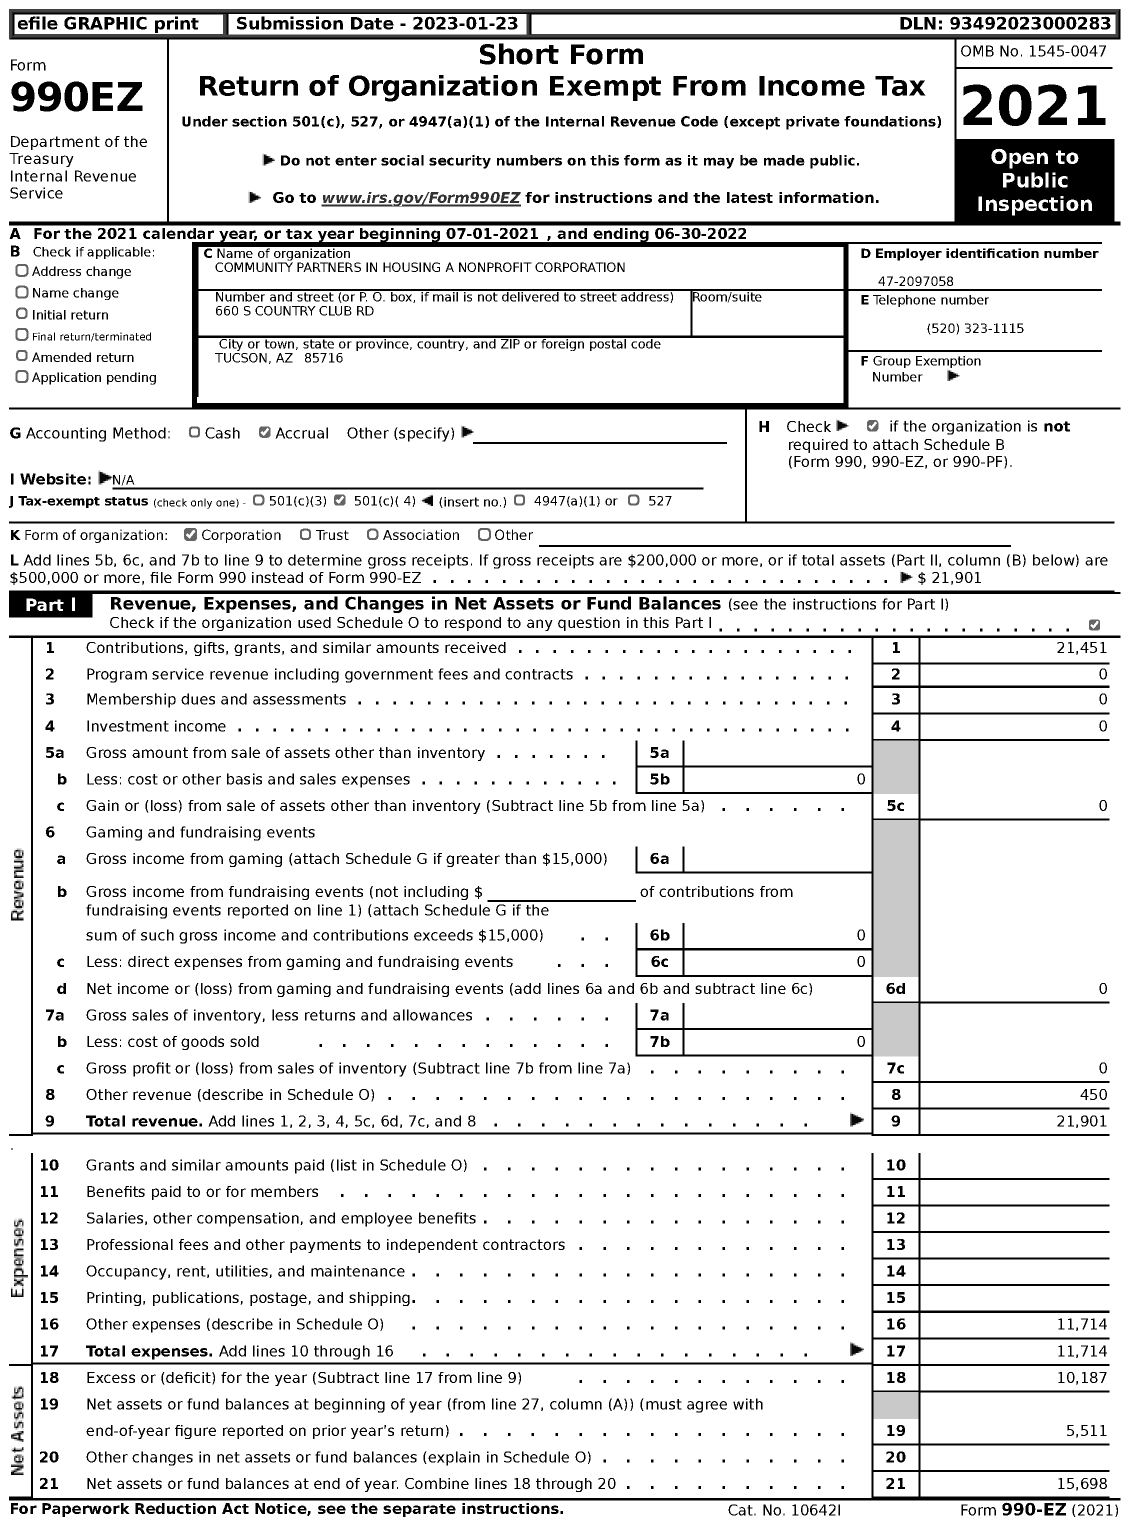 Image of first page of 2021 Form 990EZ for Community Partners in Housing A Nonprofit Corporation